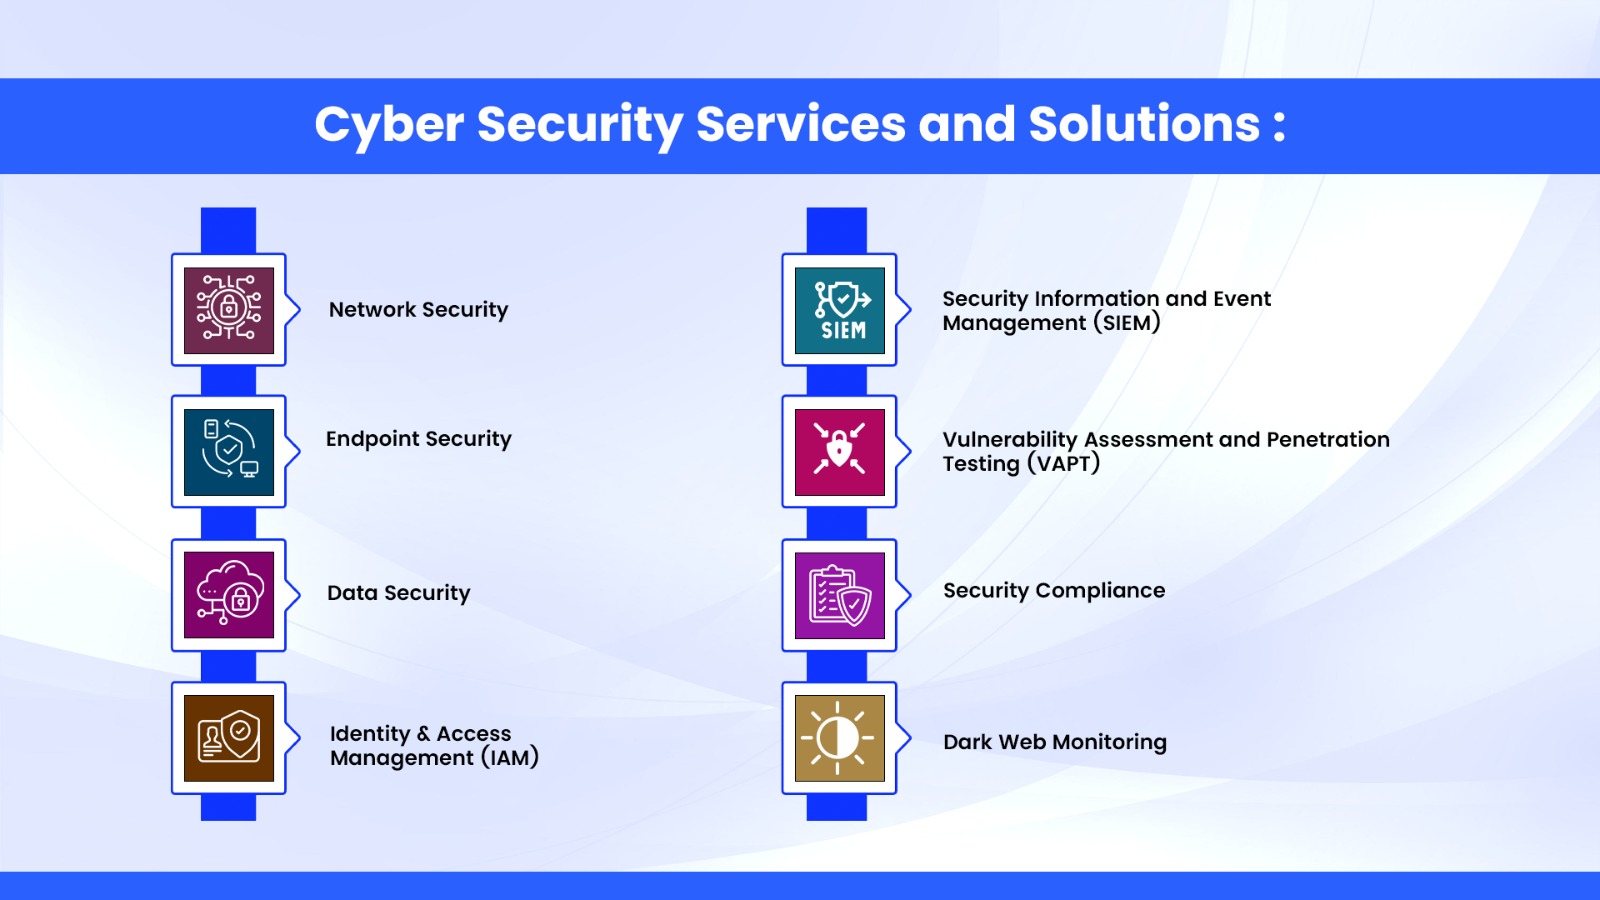 Cyber Security Services and Solutions (SOC)